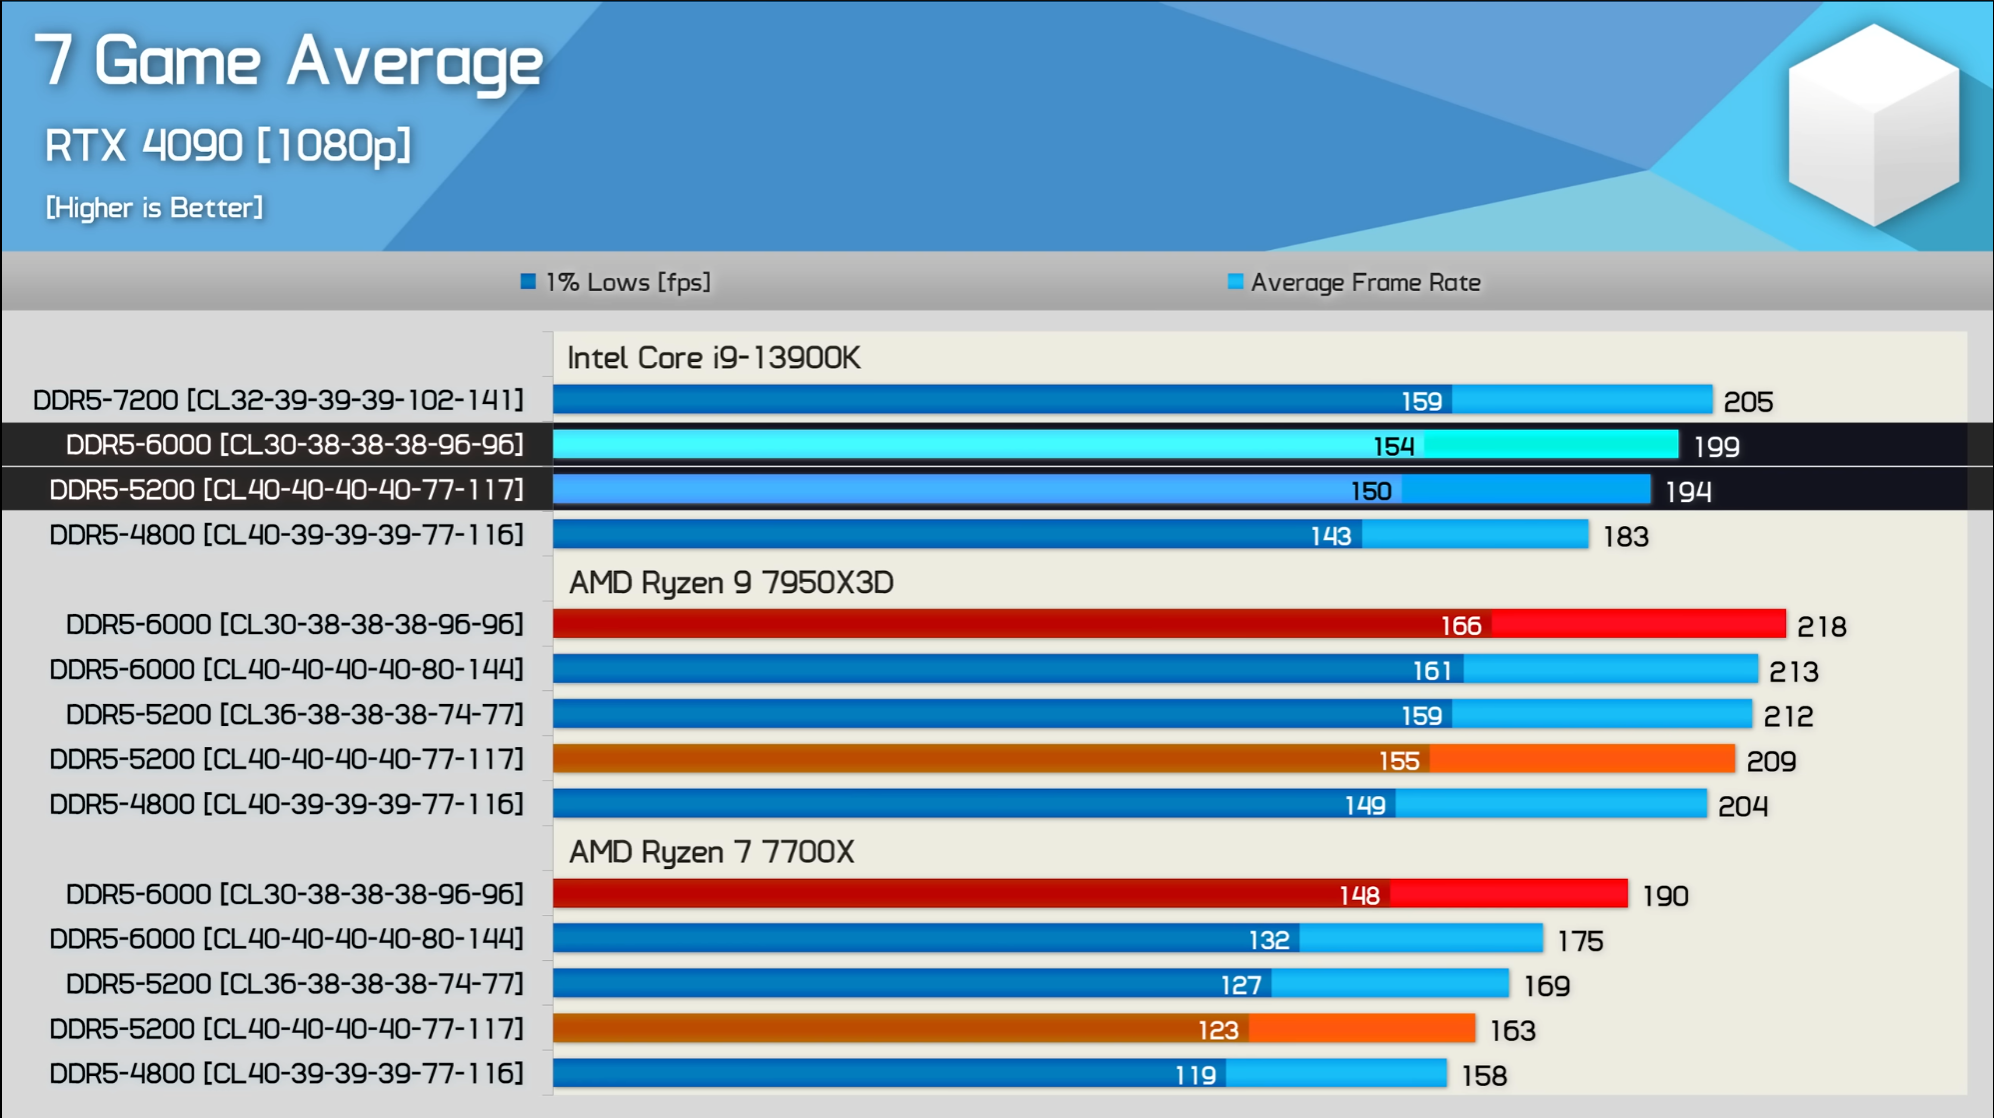 RTX 4090 - DDR5 Memory Scaling - 7 Game Average